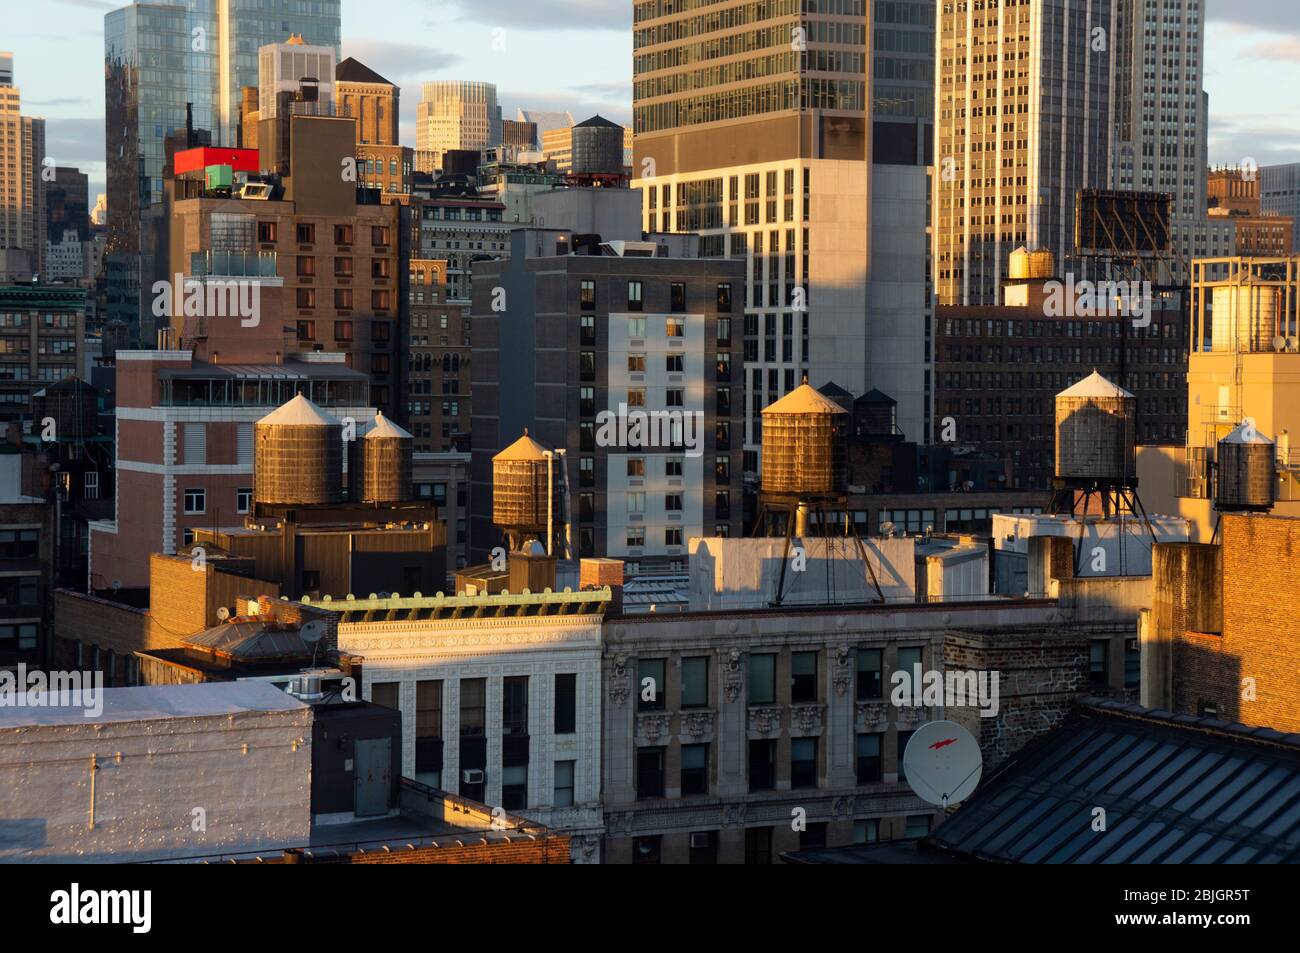 View across rooftops of Manhattan with iconic water tanks of New York Stock Photo